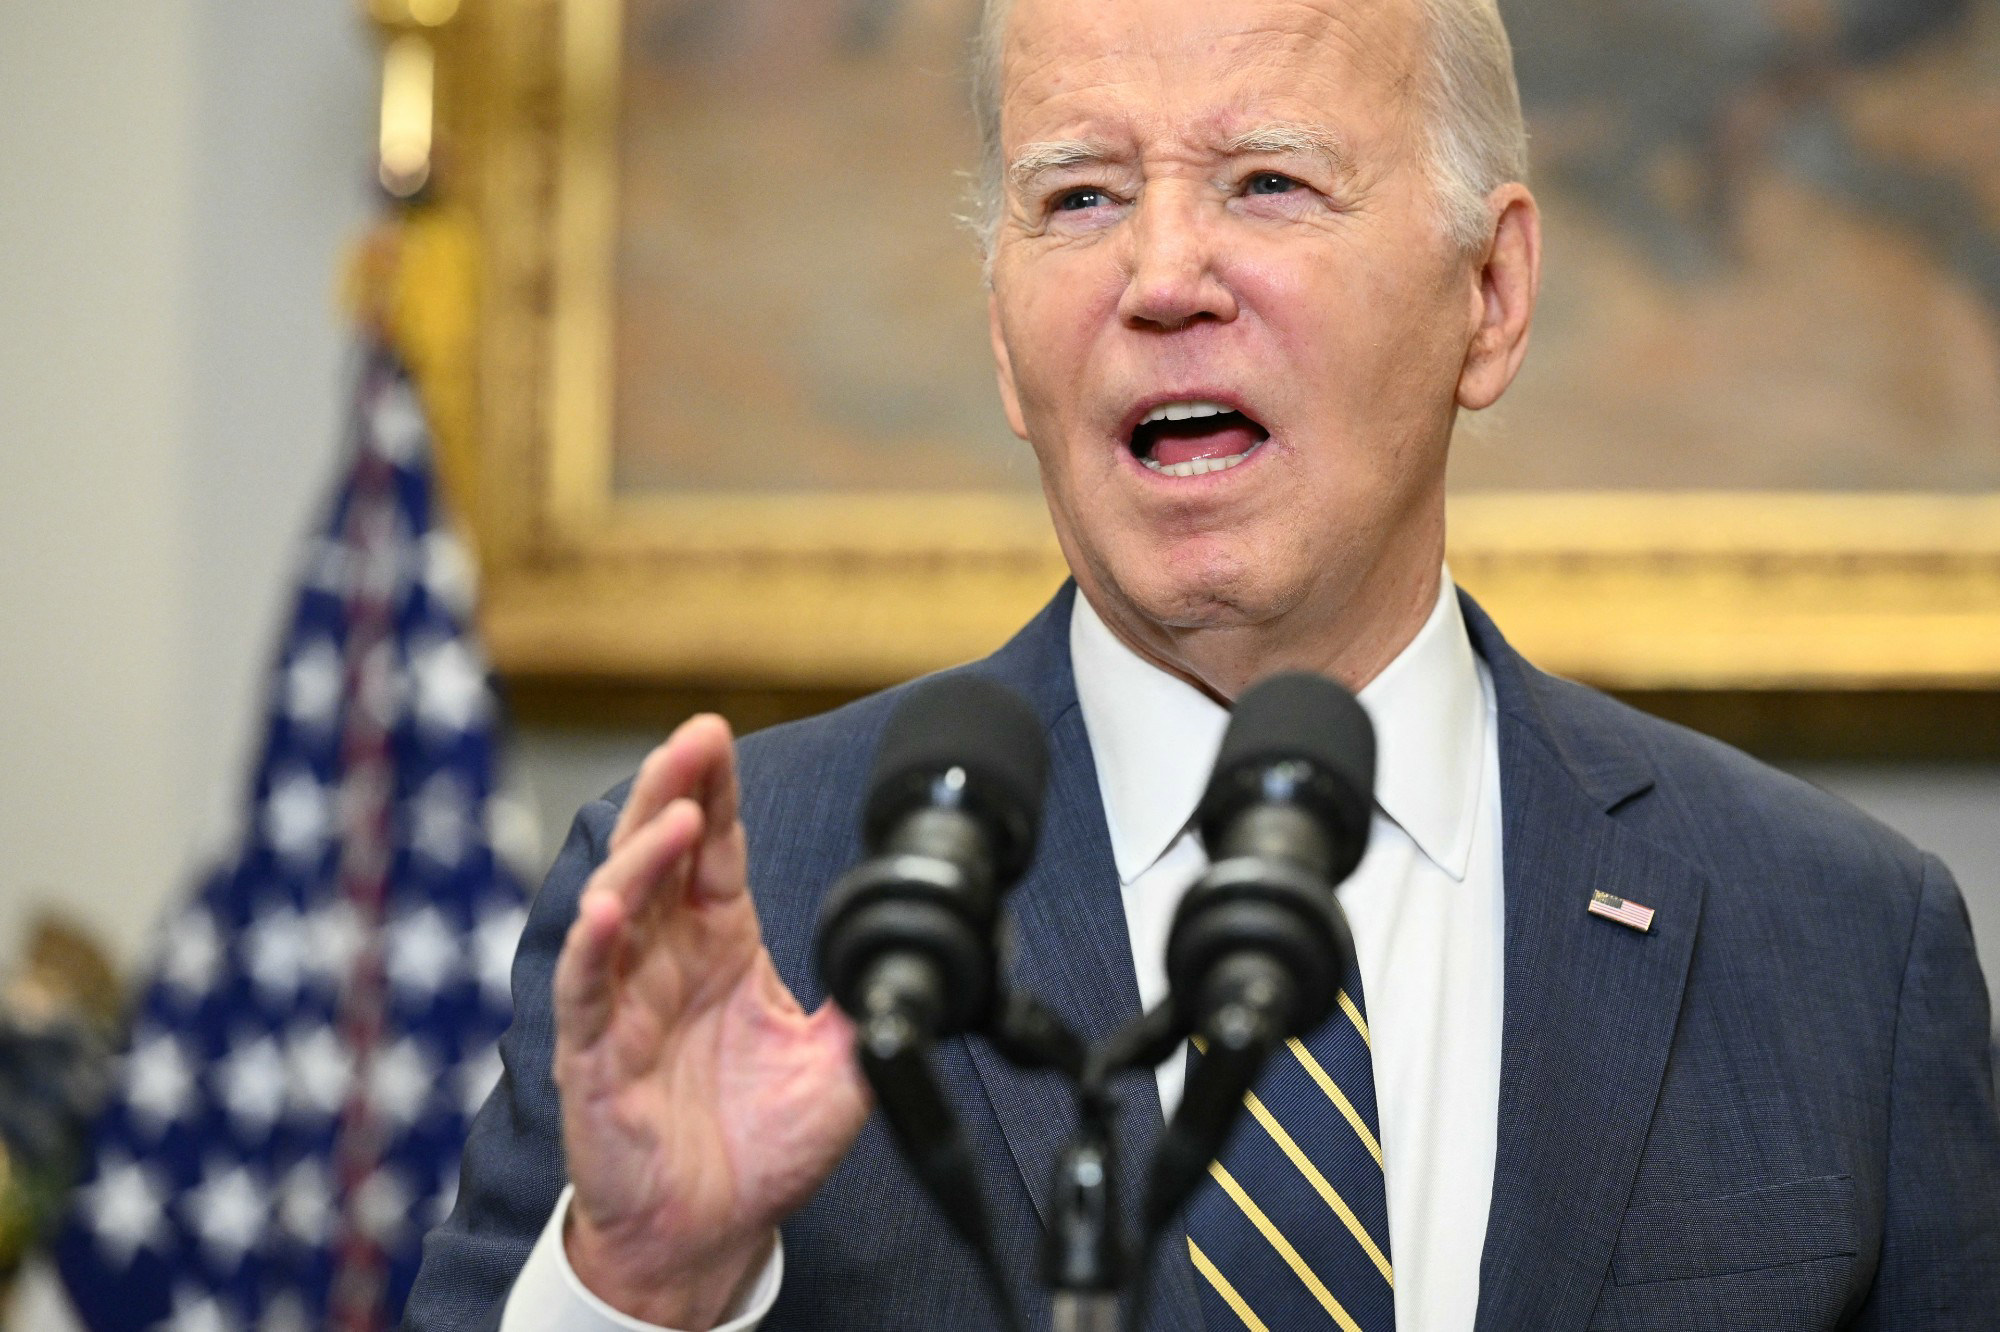 Biden Calls Jan. 6 ‘Among Worst Derelictions of Duty by a President in ...